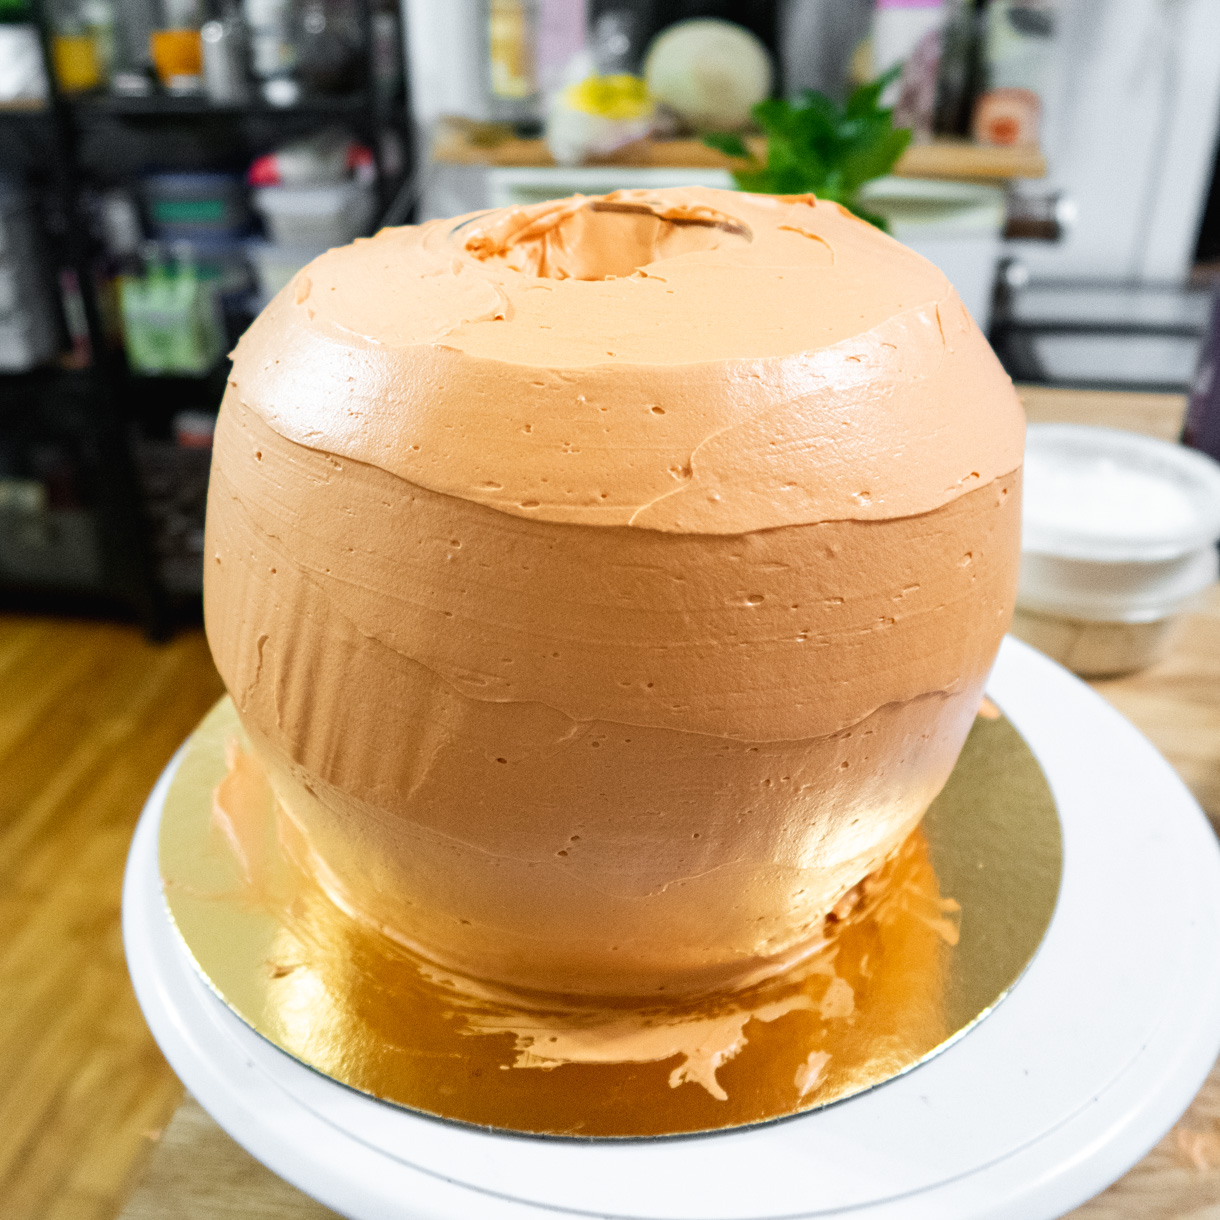 First coat of orange buttercream covering the whole cake.